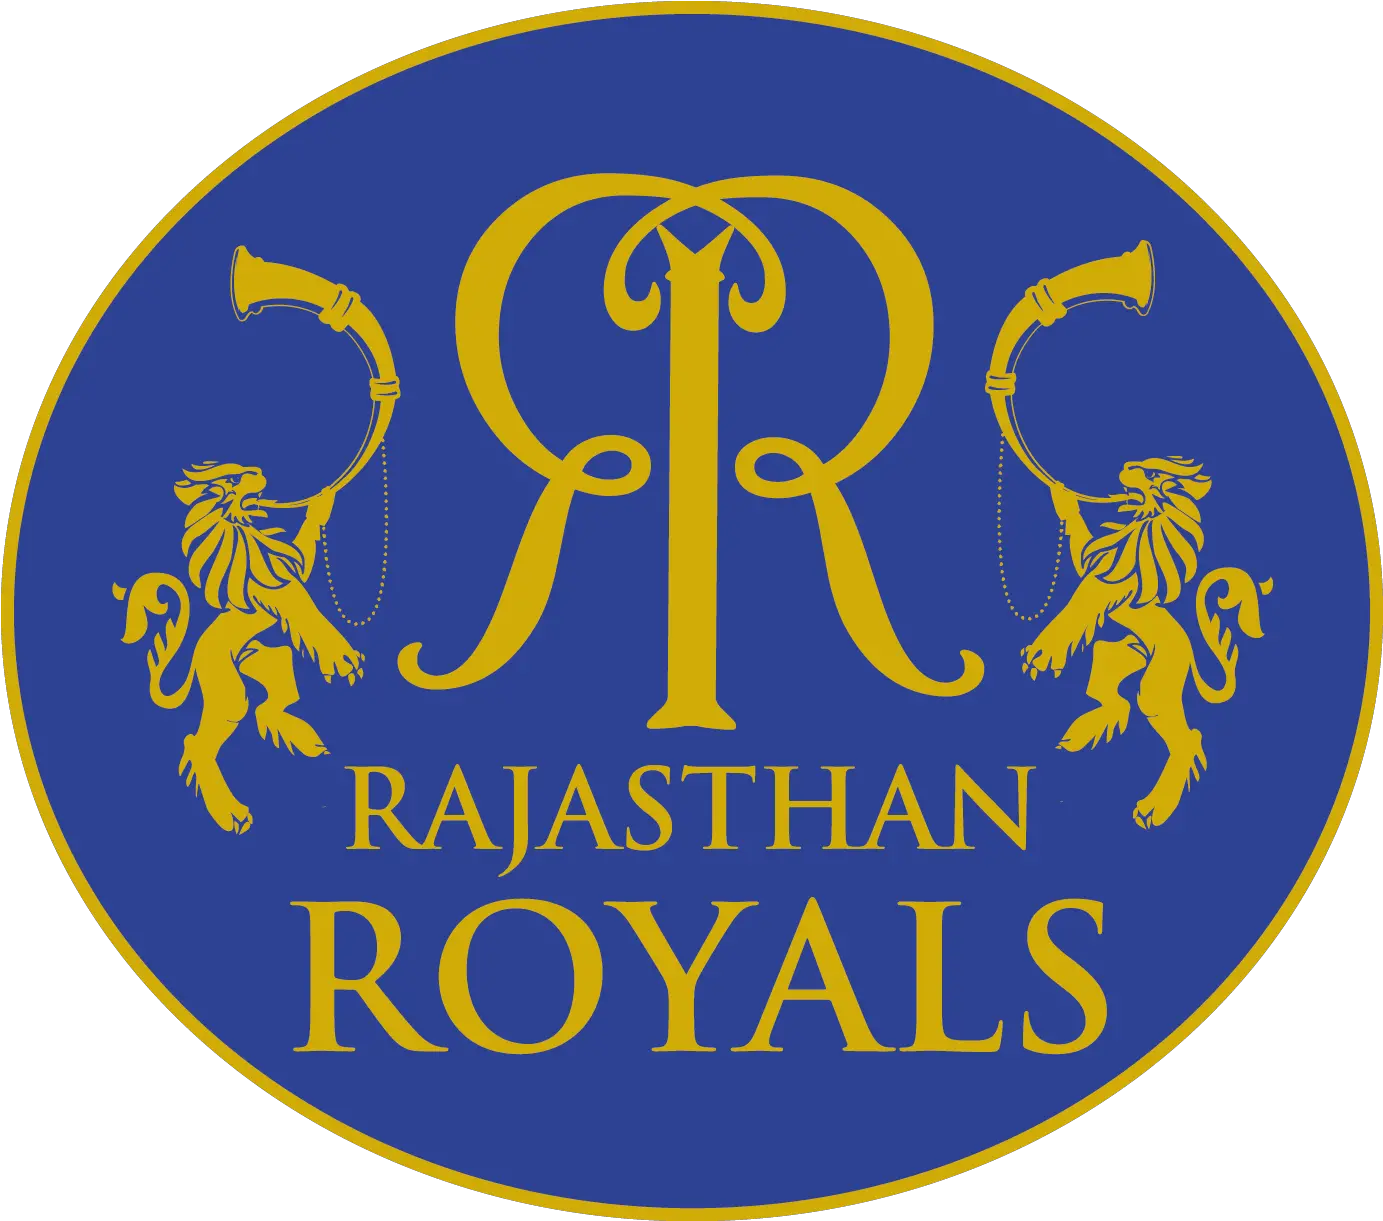 Rajasthan Royals Logo Vector Rajasthan Royals Logo Hd Png What Is The Official Icon Of Chennai Super Kings Team